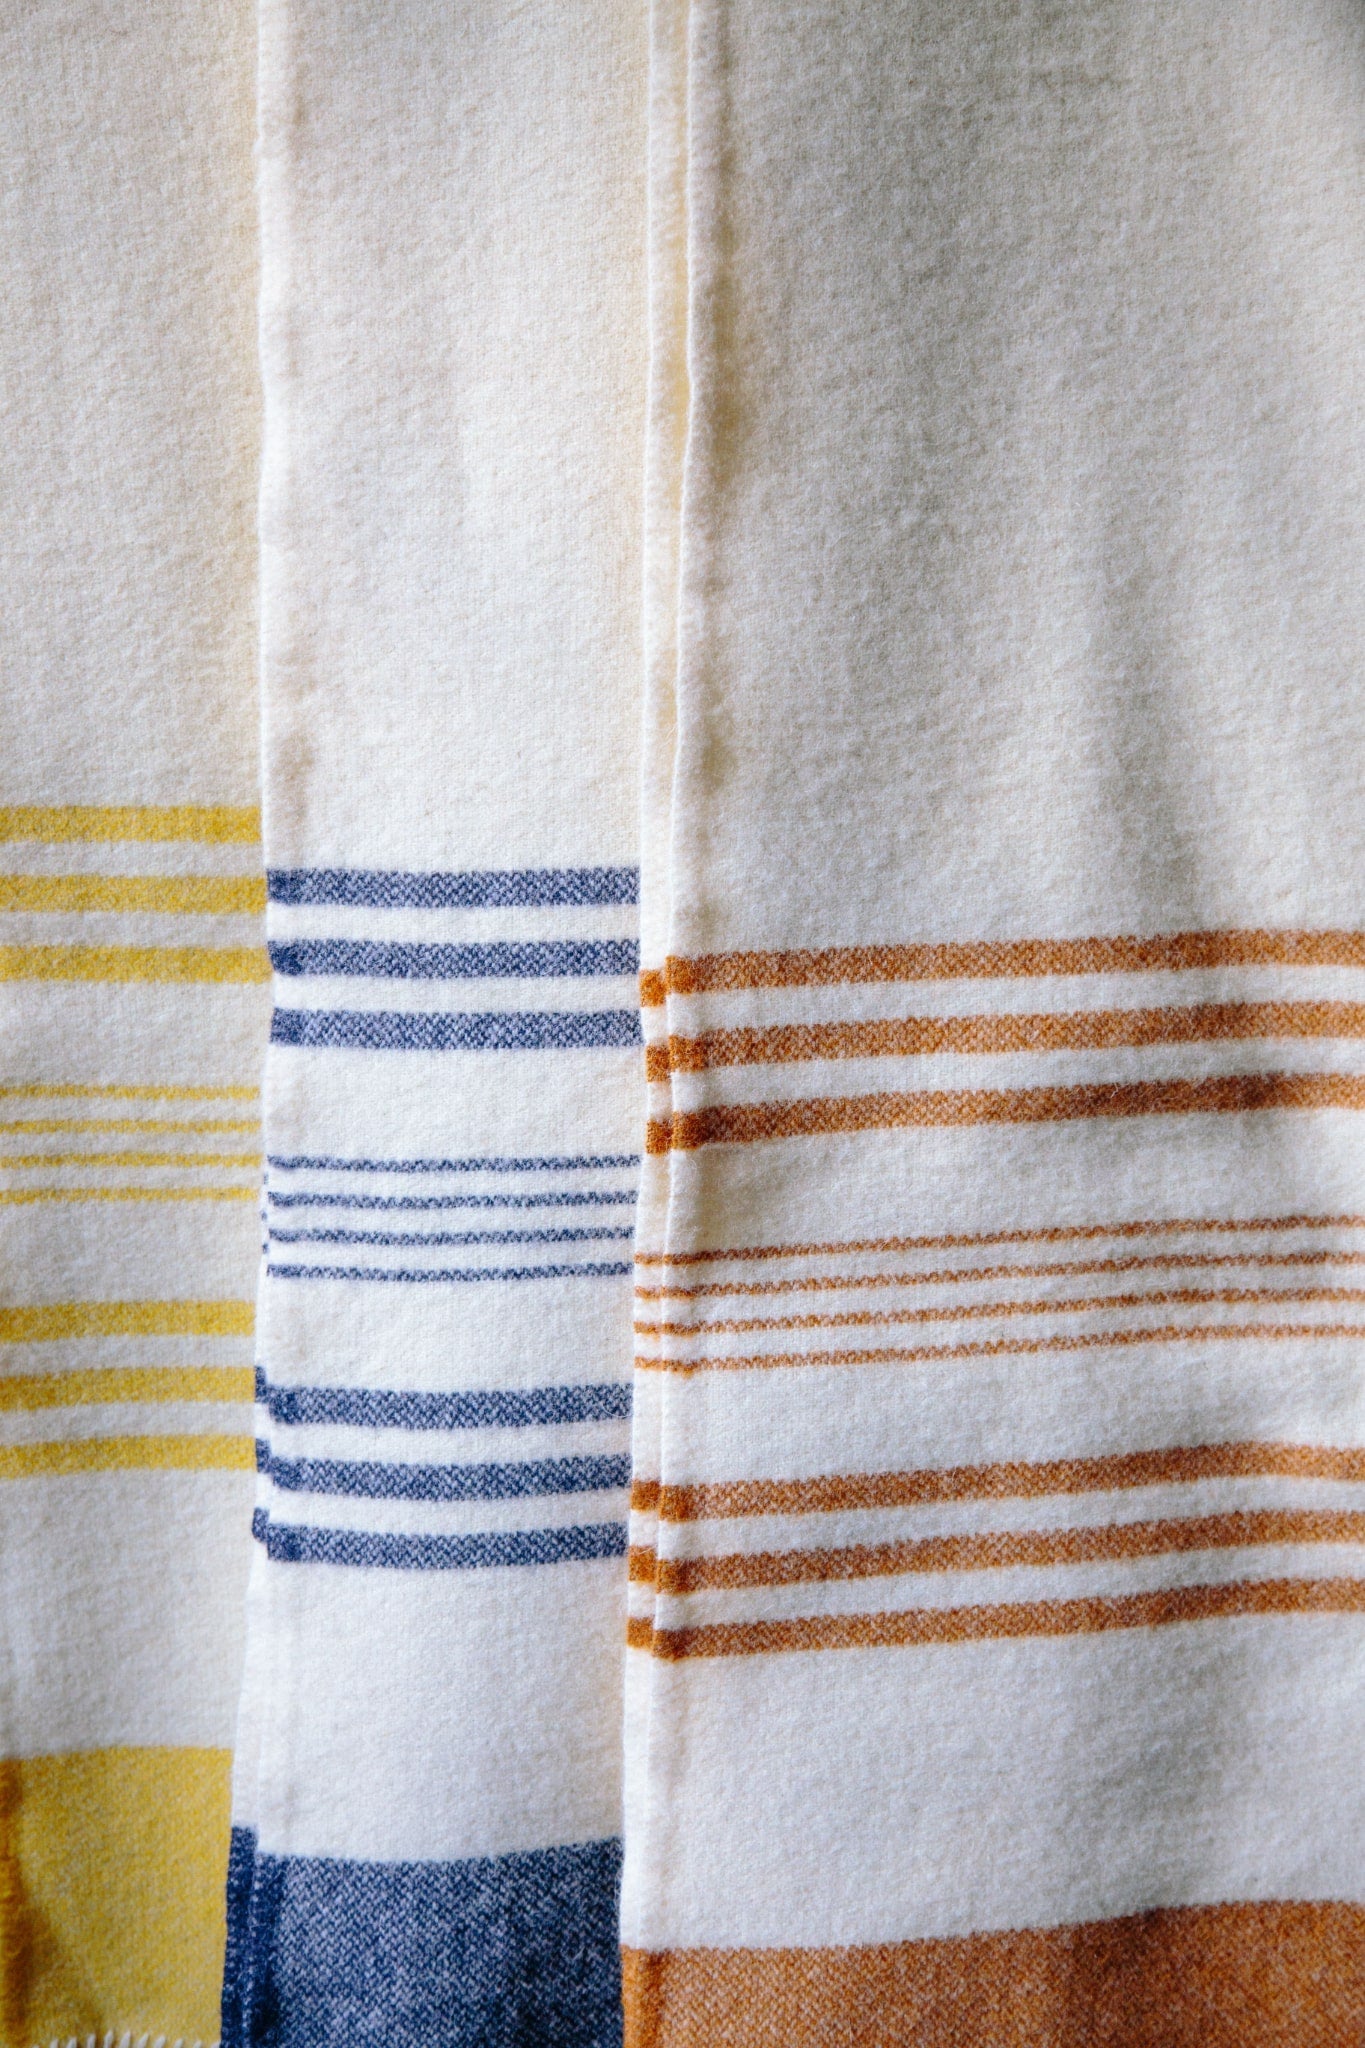 Three striped lambswool blankets in yellow, ochre and navy blue, hung vertically infront of eachother. The thick, weight of the blankets can be seen.